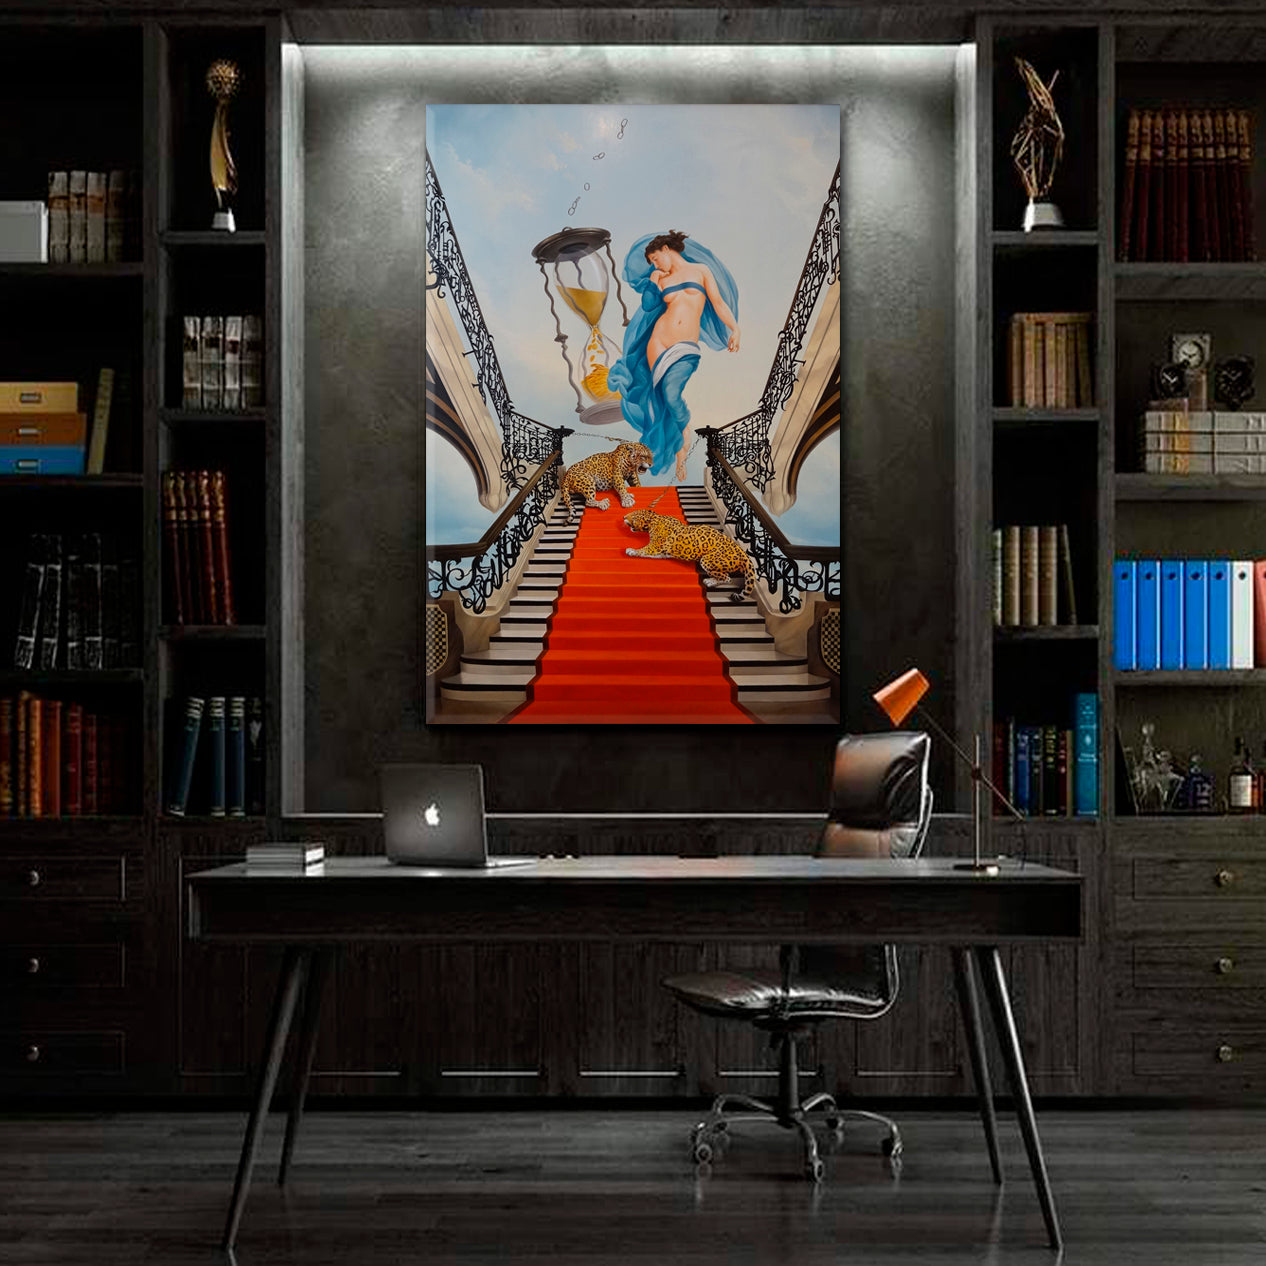 Stairway to Heaven Surrealism Art Dali Style  | Vertical Surreal Fantasy Large Art Print Décor Artesty   